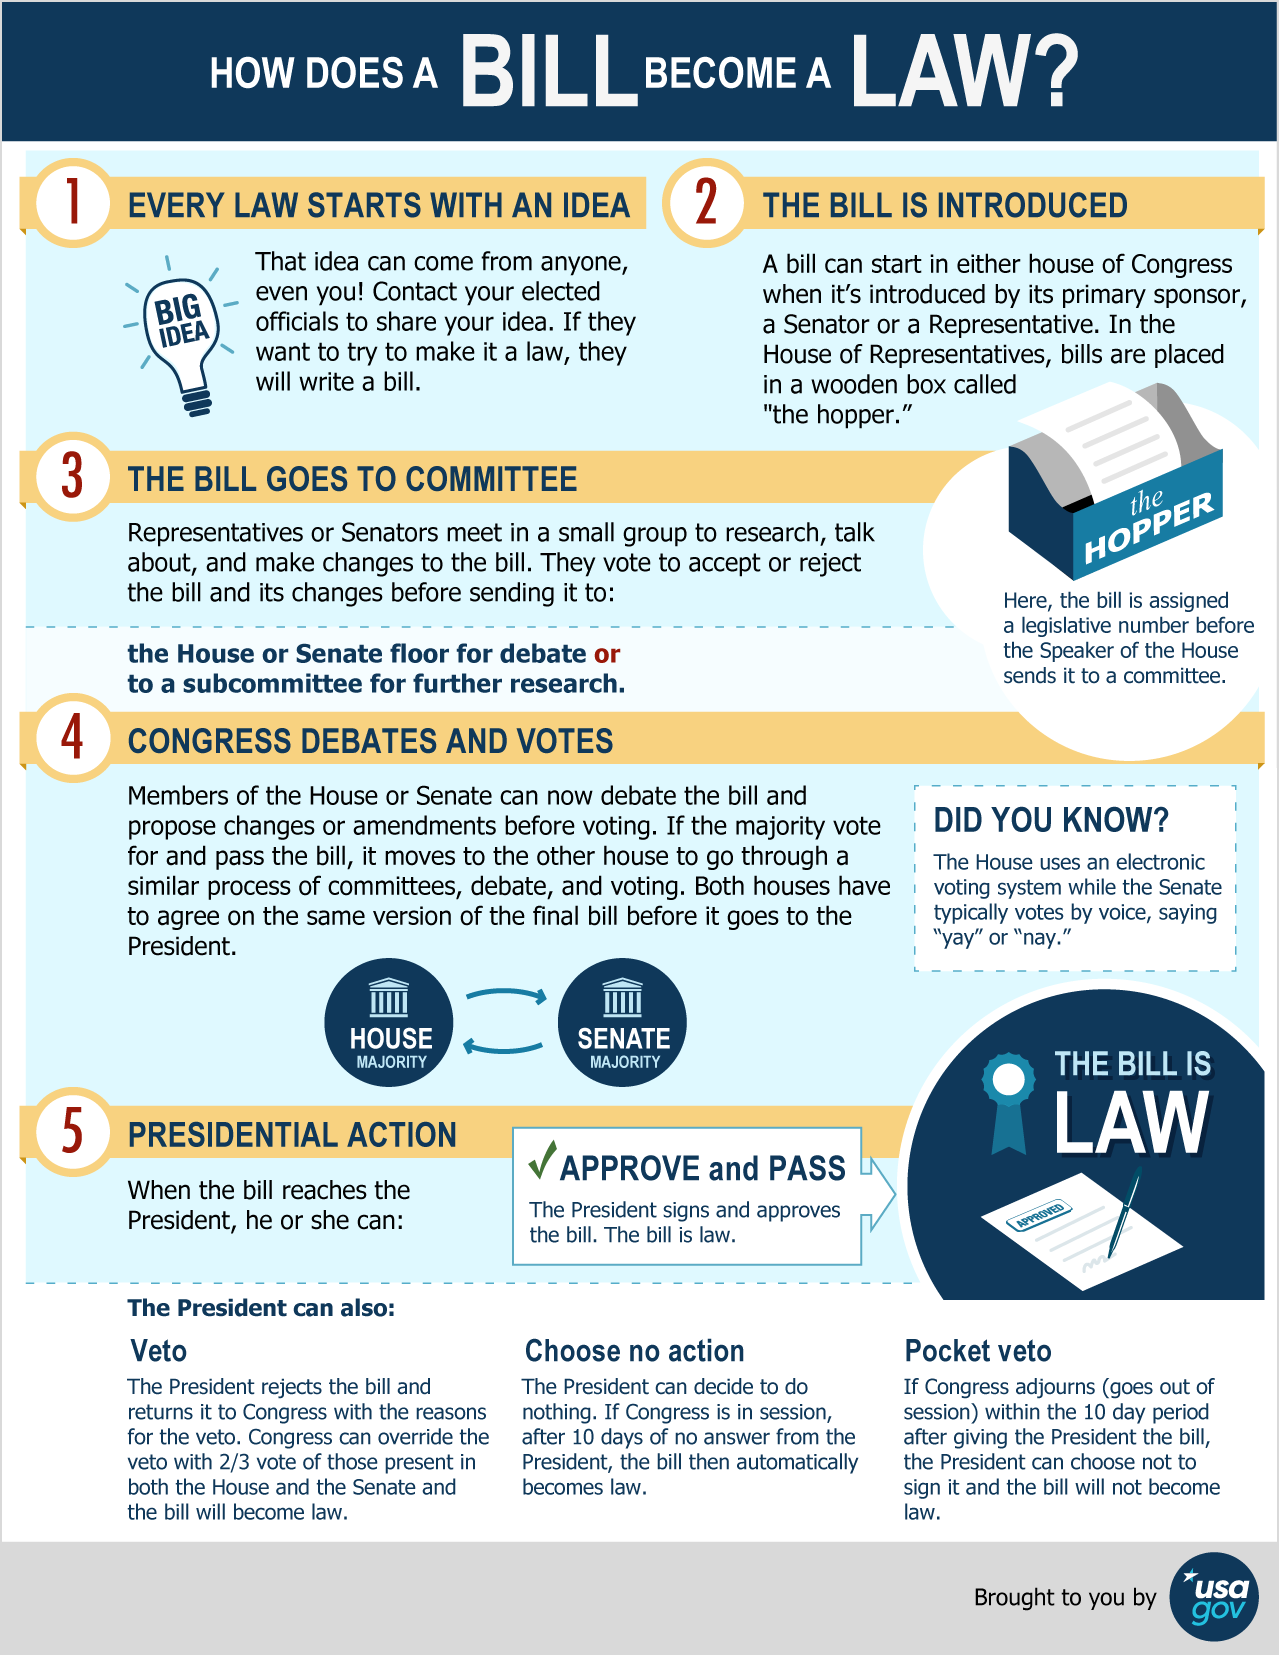 How a Bill Becomes a Law infographic summary. 